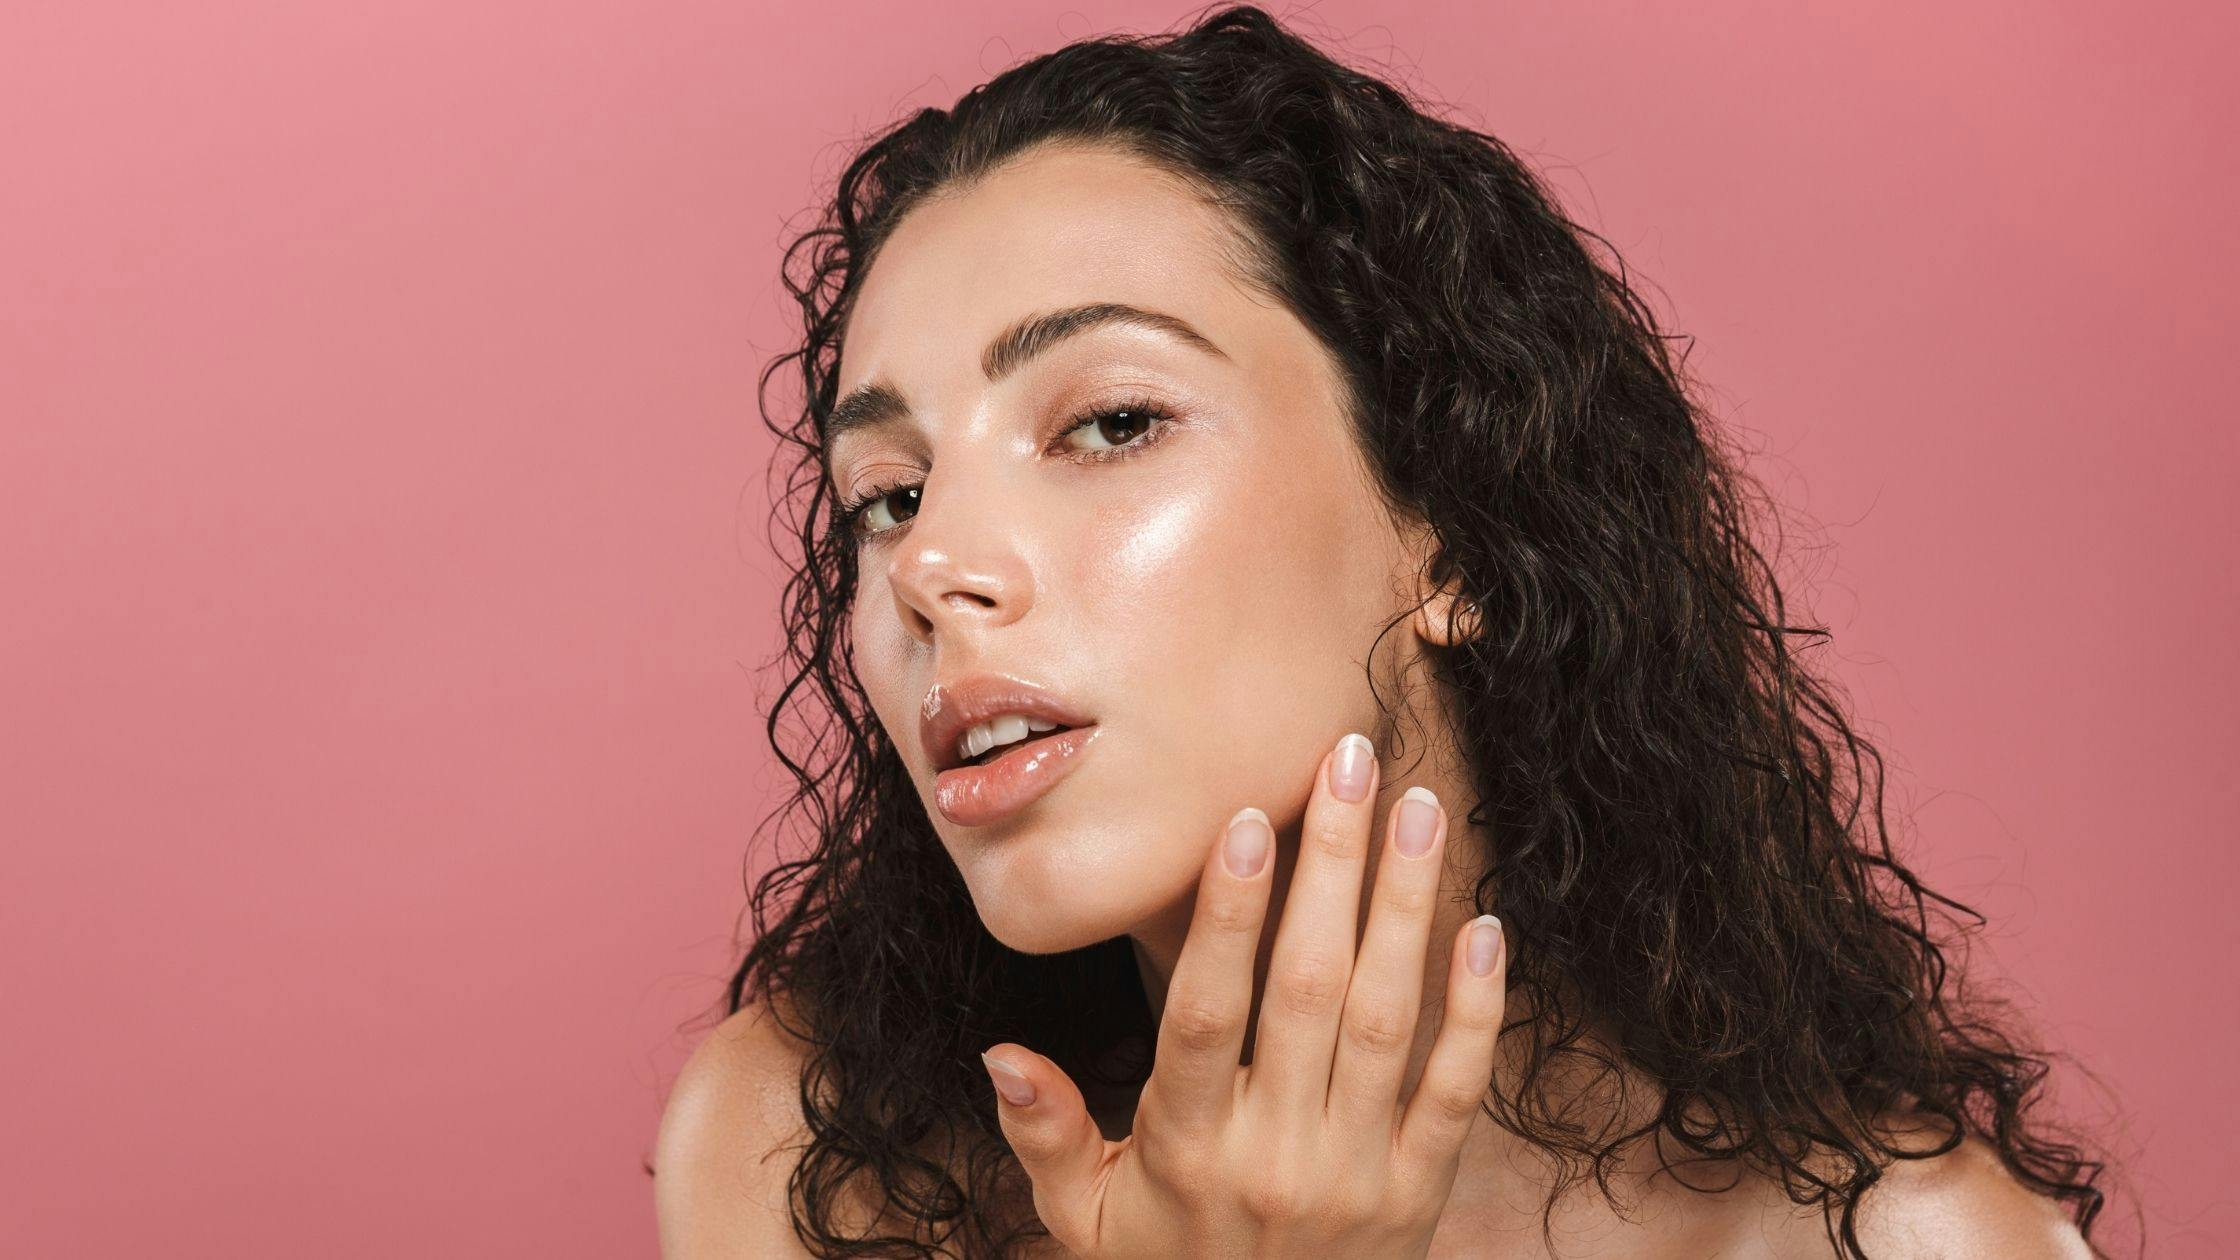 a woman with curly hair is touching her face on a pink background .